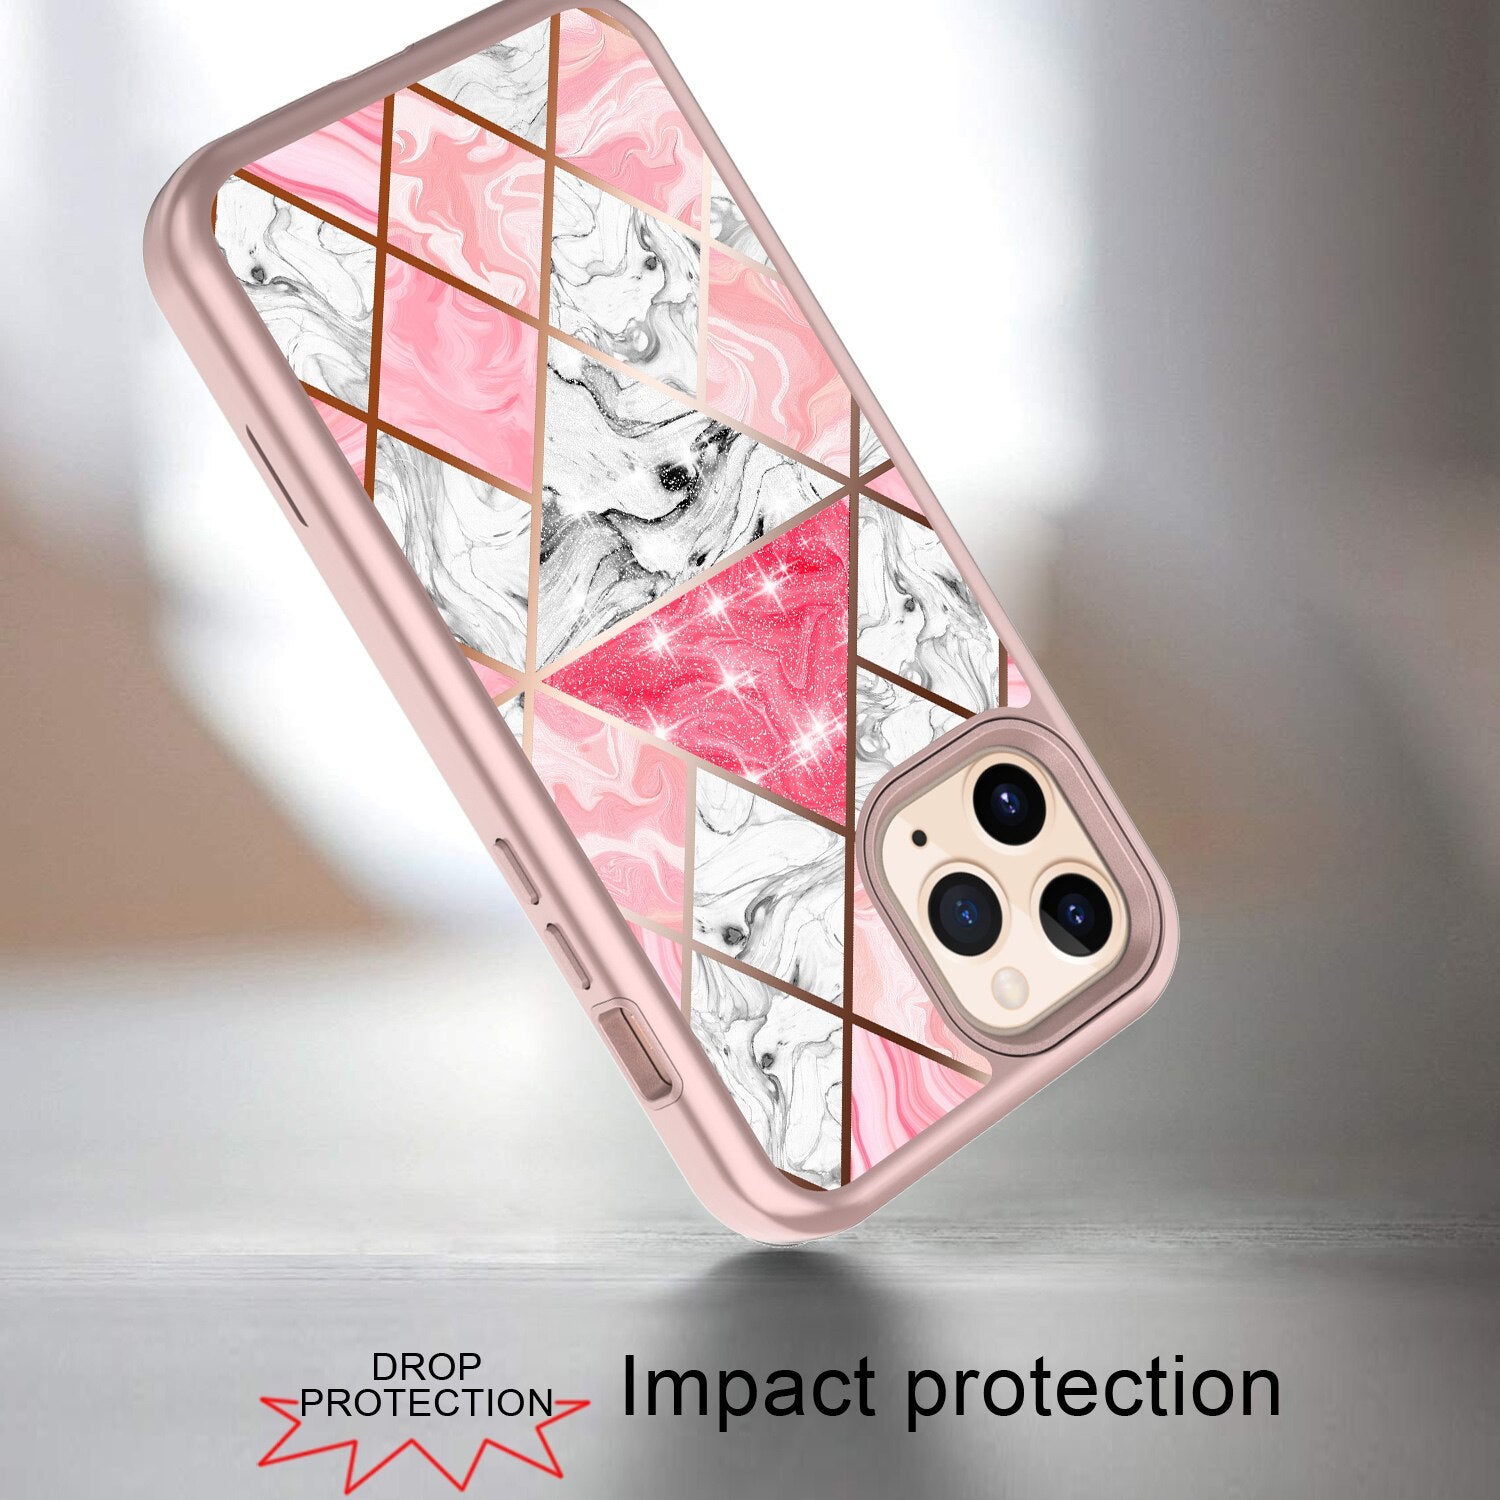 Glitter Marble Case For iPhone 12 Pro Max Case, WEFOR Flowers Hard Back Cover Matte Anti-fall Shockproof Case for iPhone 12 mini - 380230 Find Epic Store